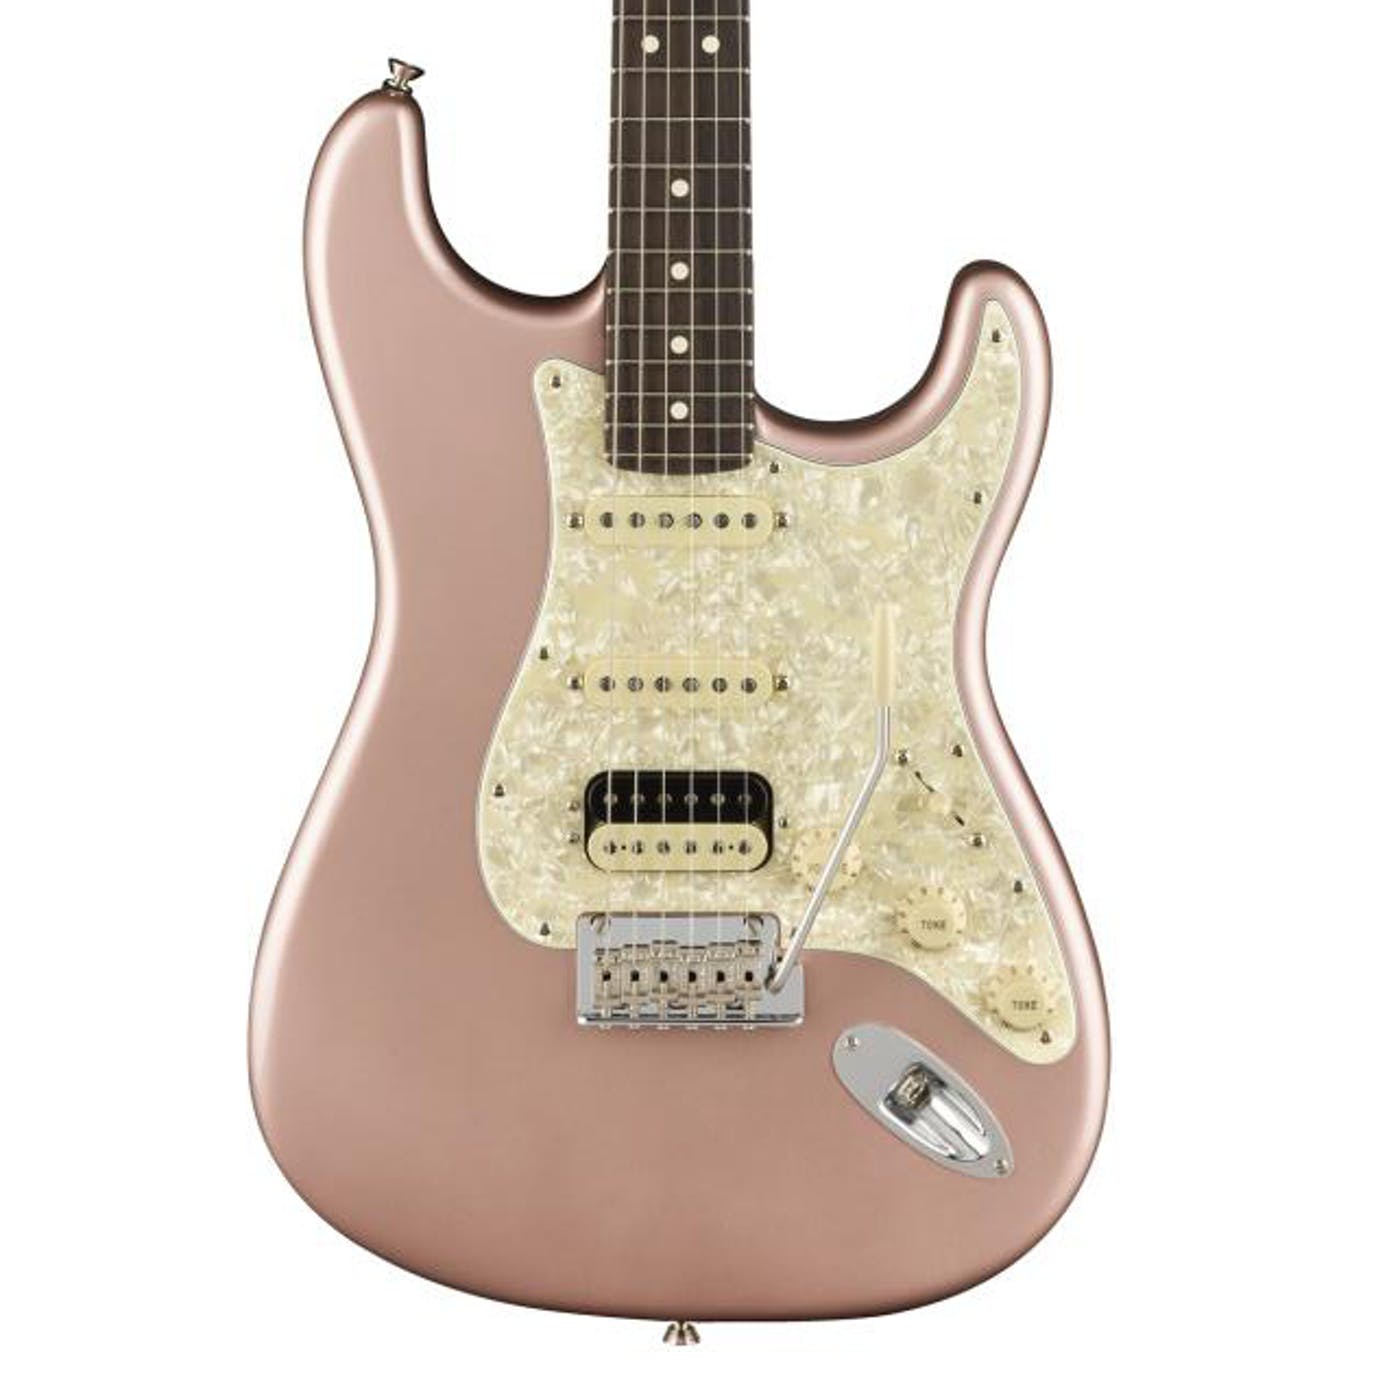 Fender-American-Professional-Strat-Ltd-Edition-HSS-SHAW-in-Rose-Gold-w-Rosewood-Neck